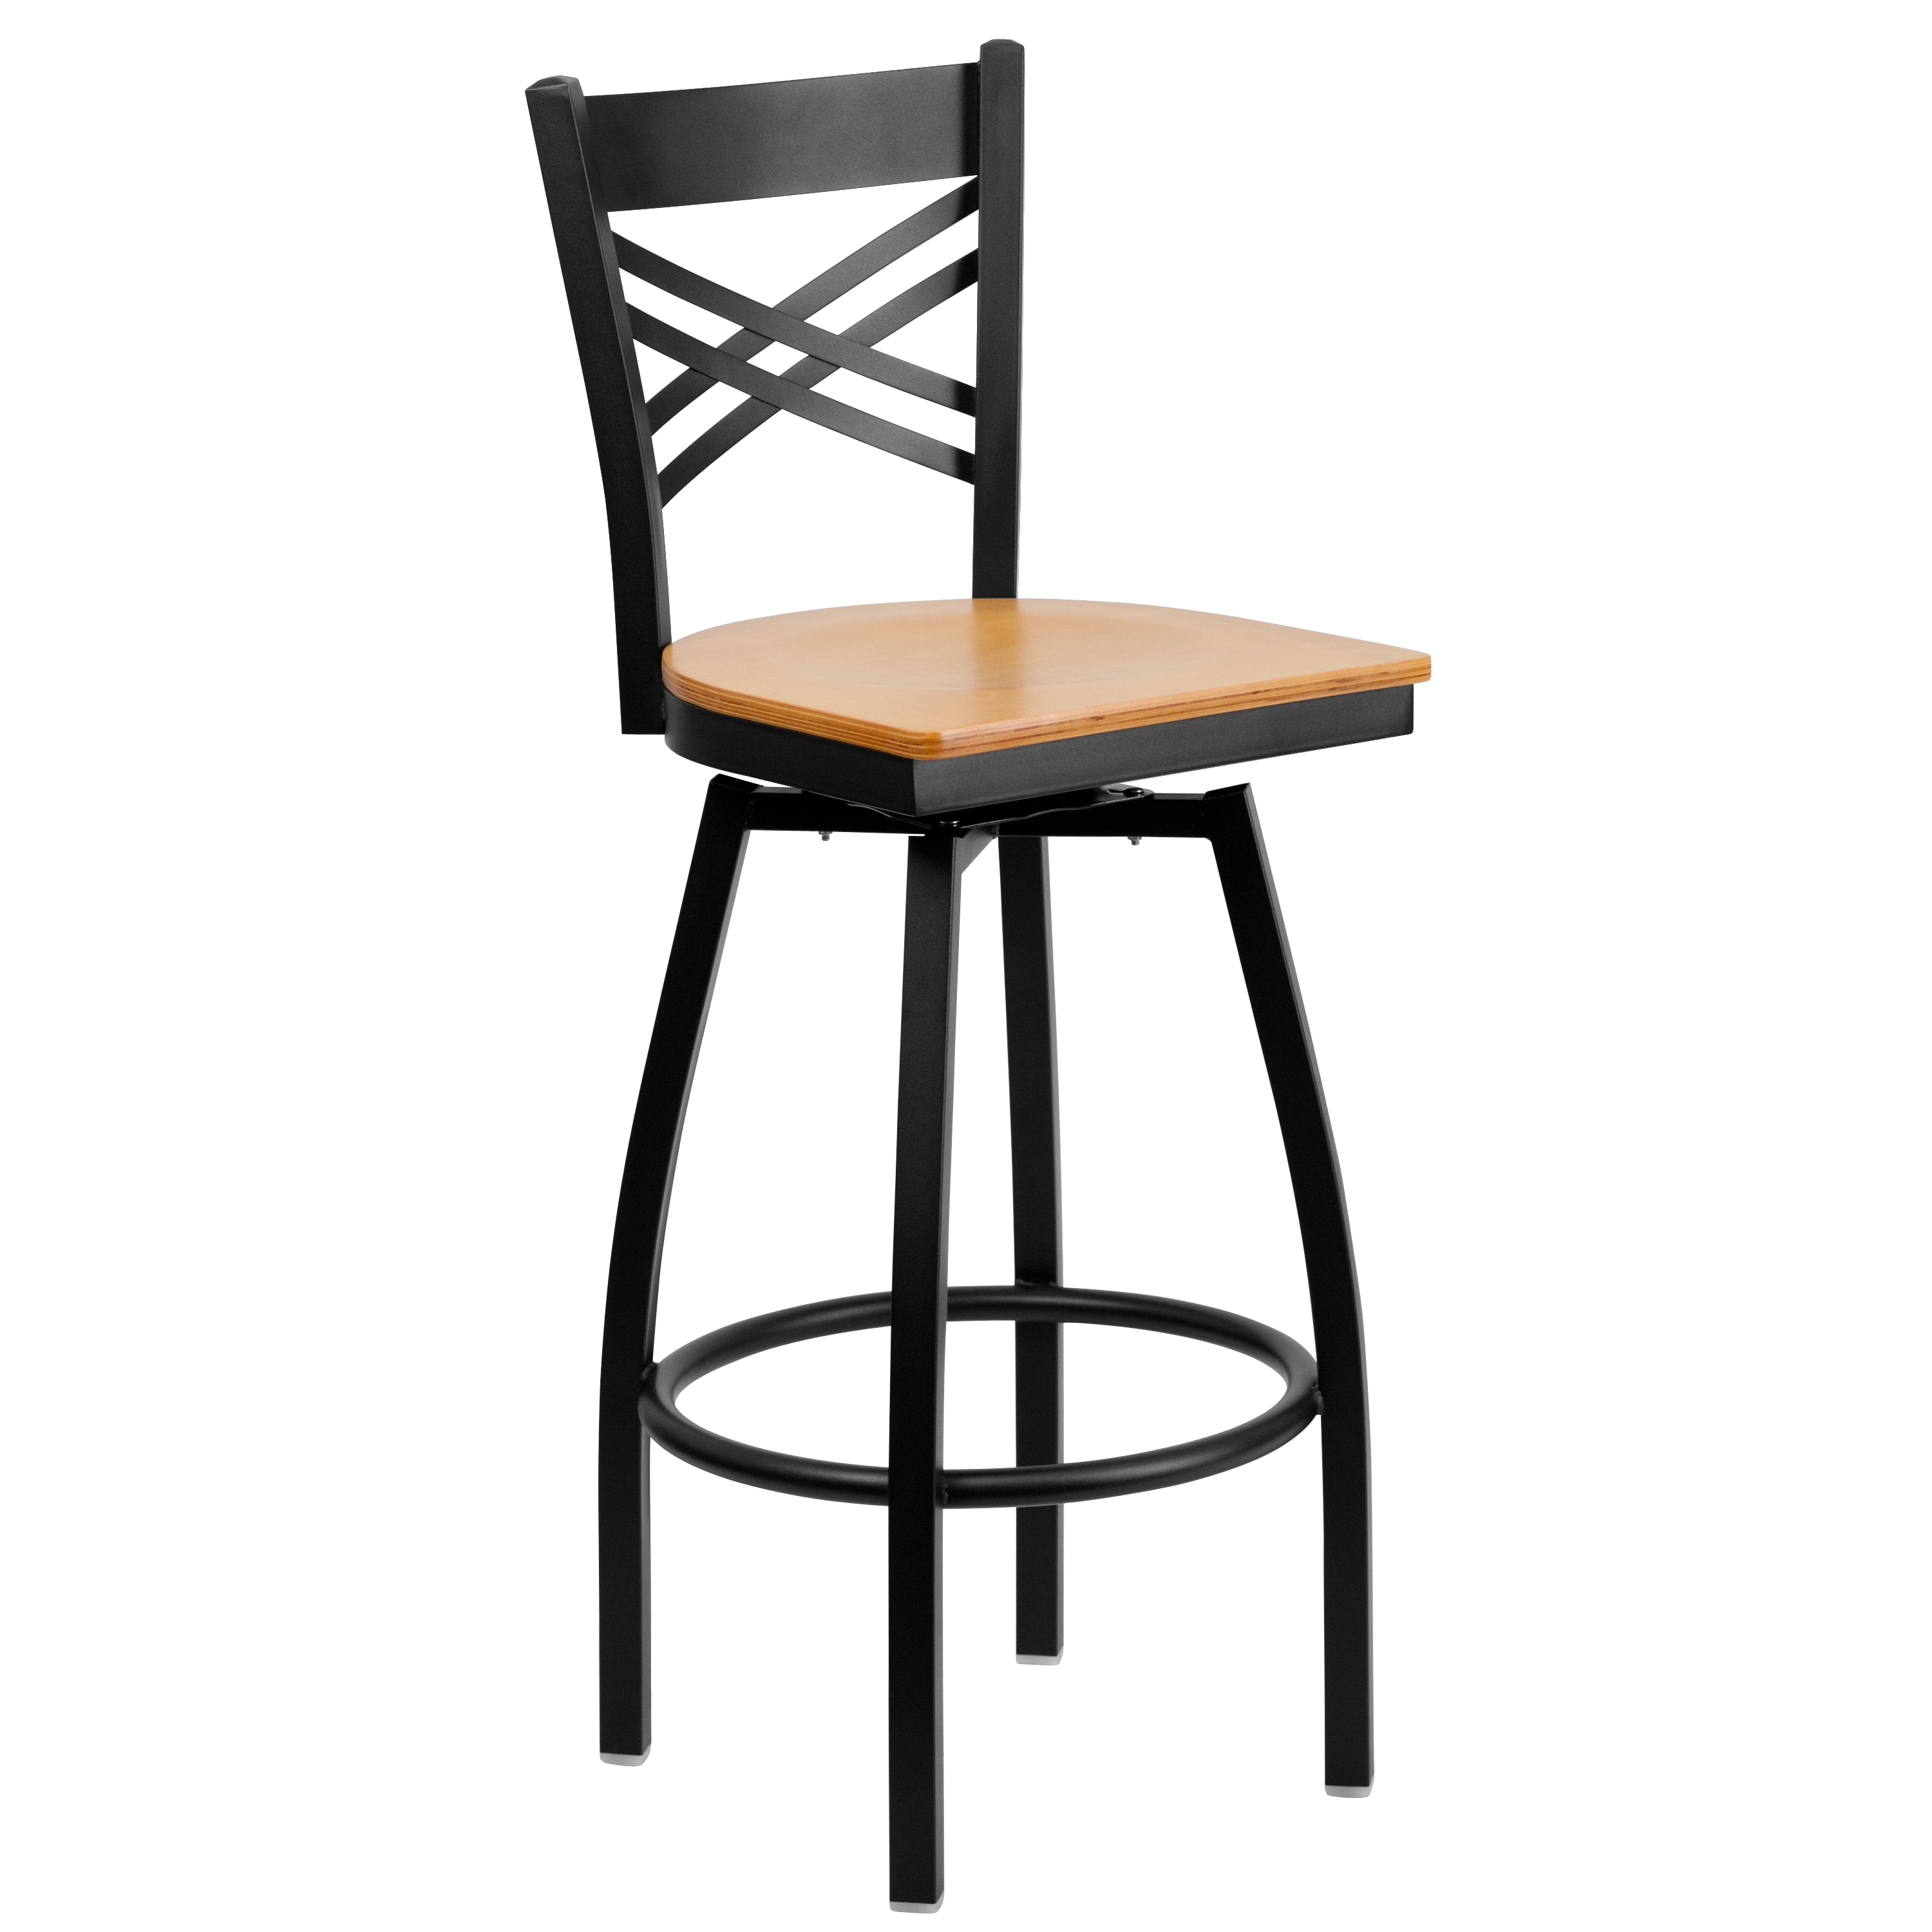 Swivel Bar Stool In The Stools, Metal Swivel Bar Stools With Wood Seat